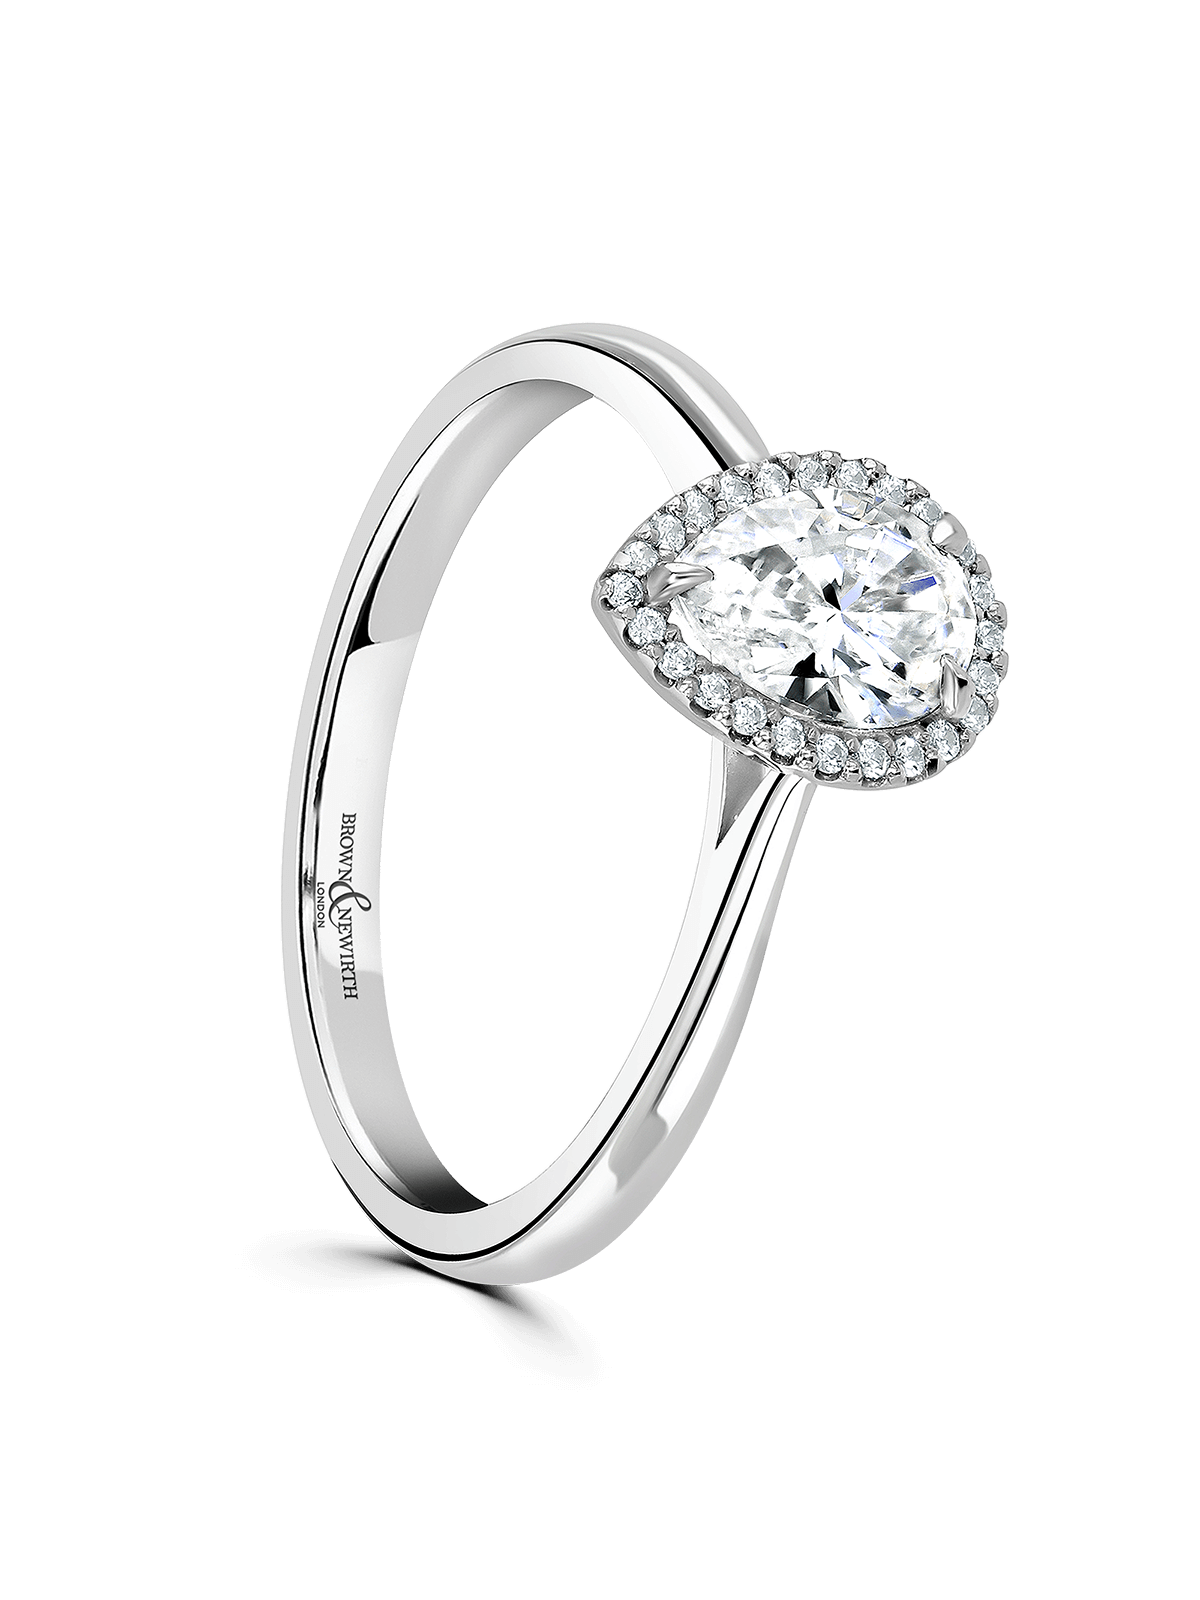 Brown & Newirth Cordelia 0.50ct Pear Cut Certificated Diamond Halo Engagement Ring in Platinum